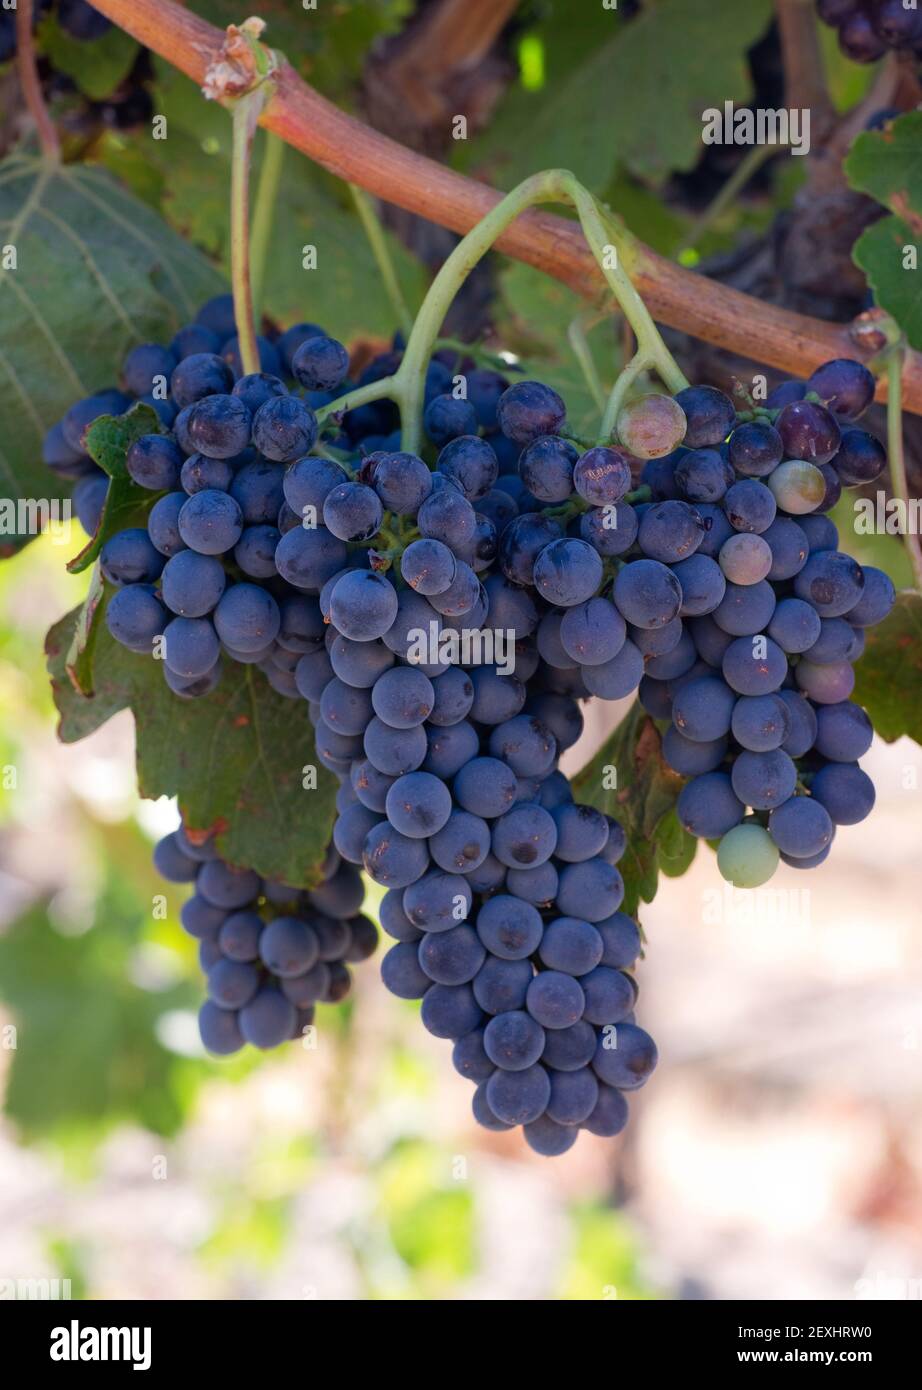 Grape Clusters Vertical Composition Still on Vine Country Vineyard Stock Photo